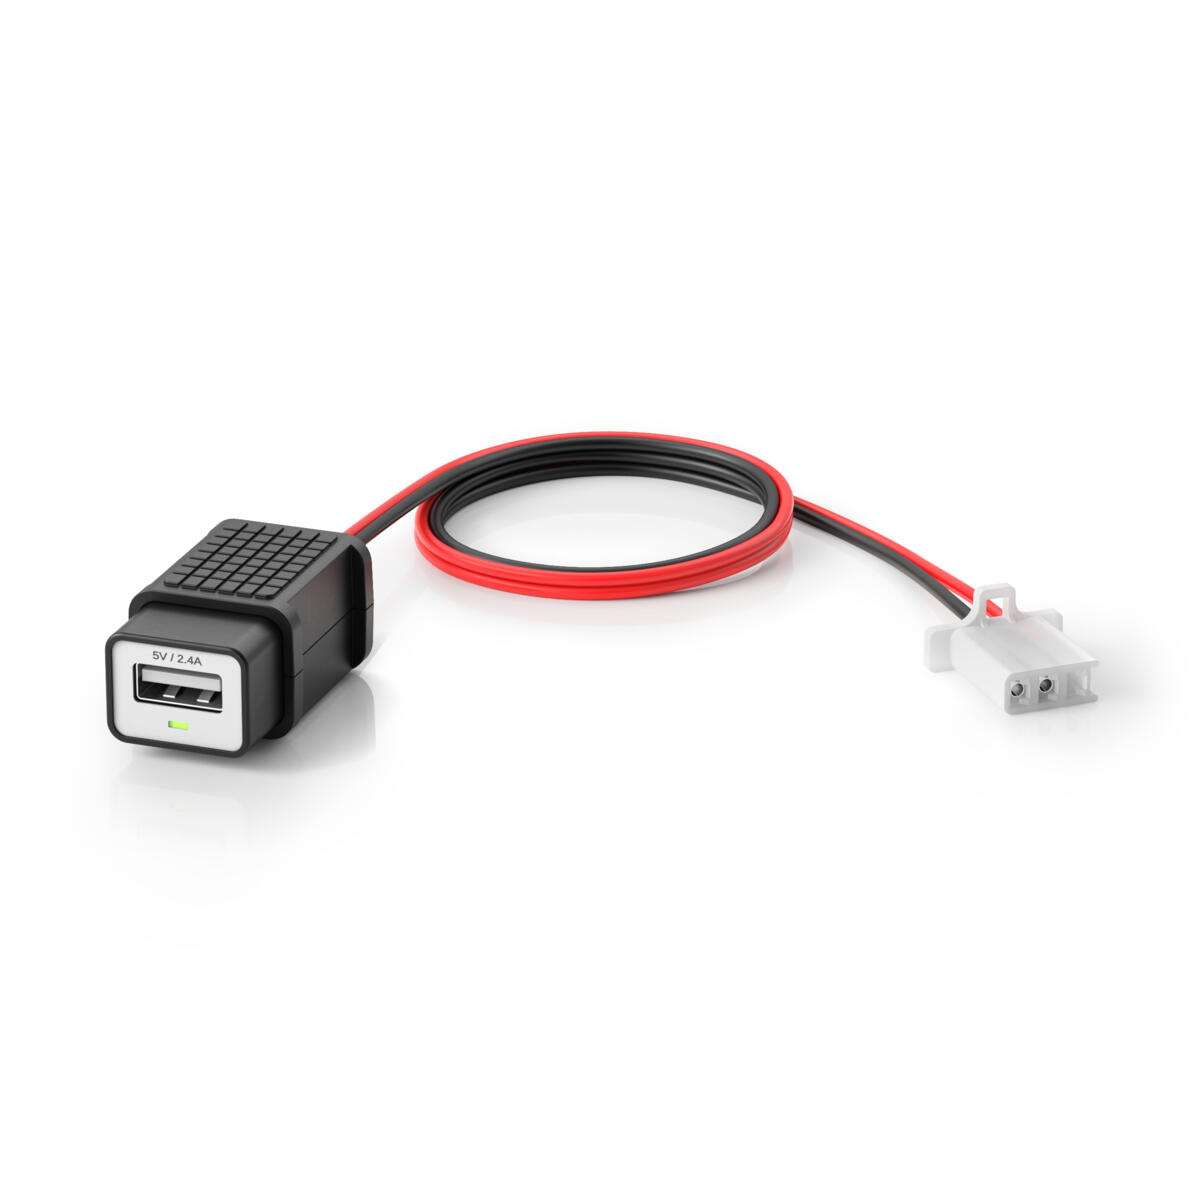 USB 5Volt outlet kit for pre-wired units